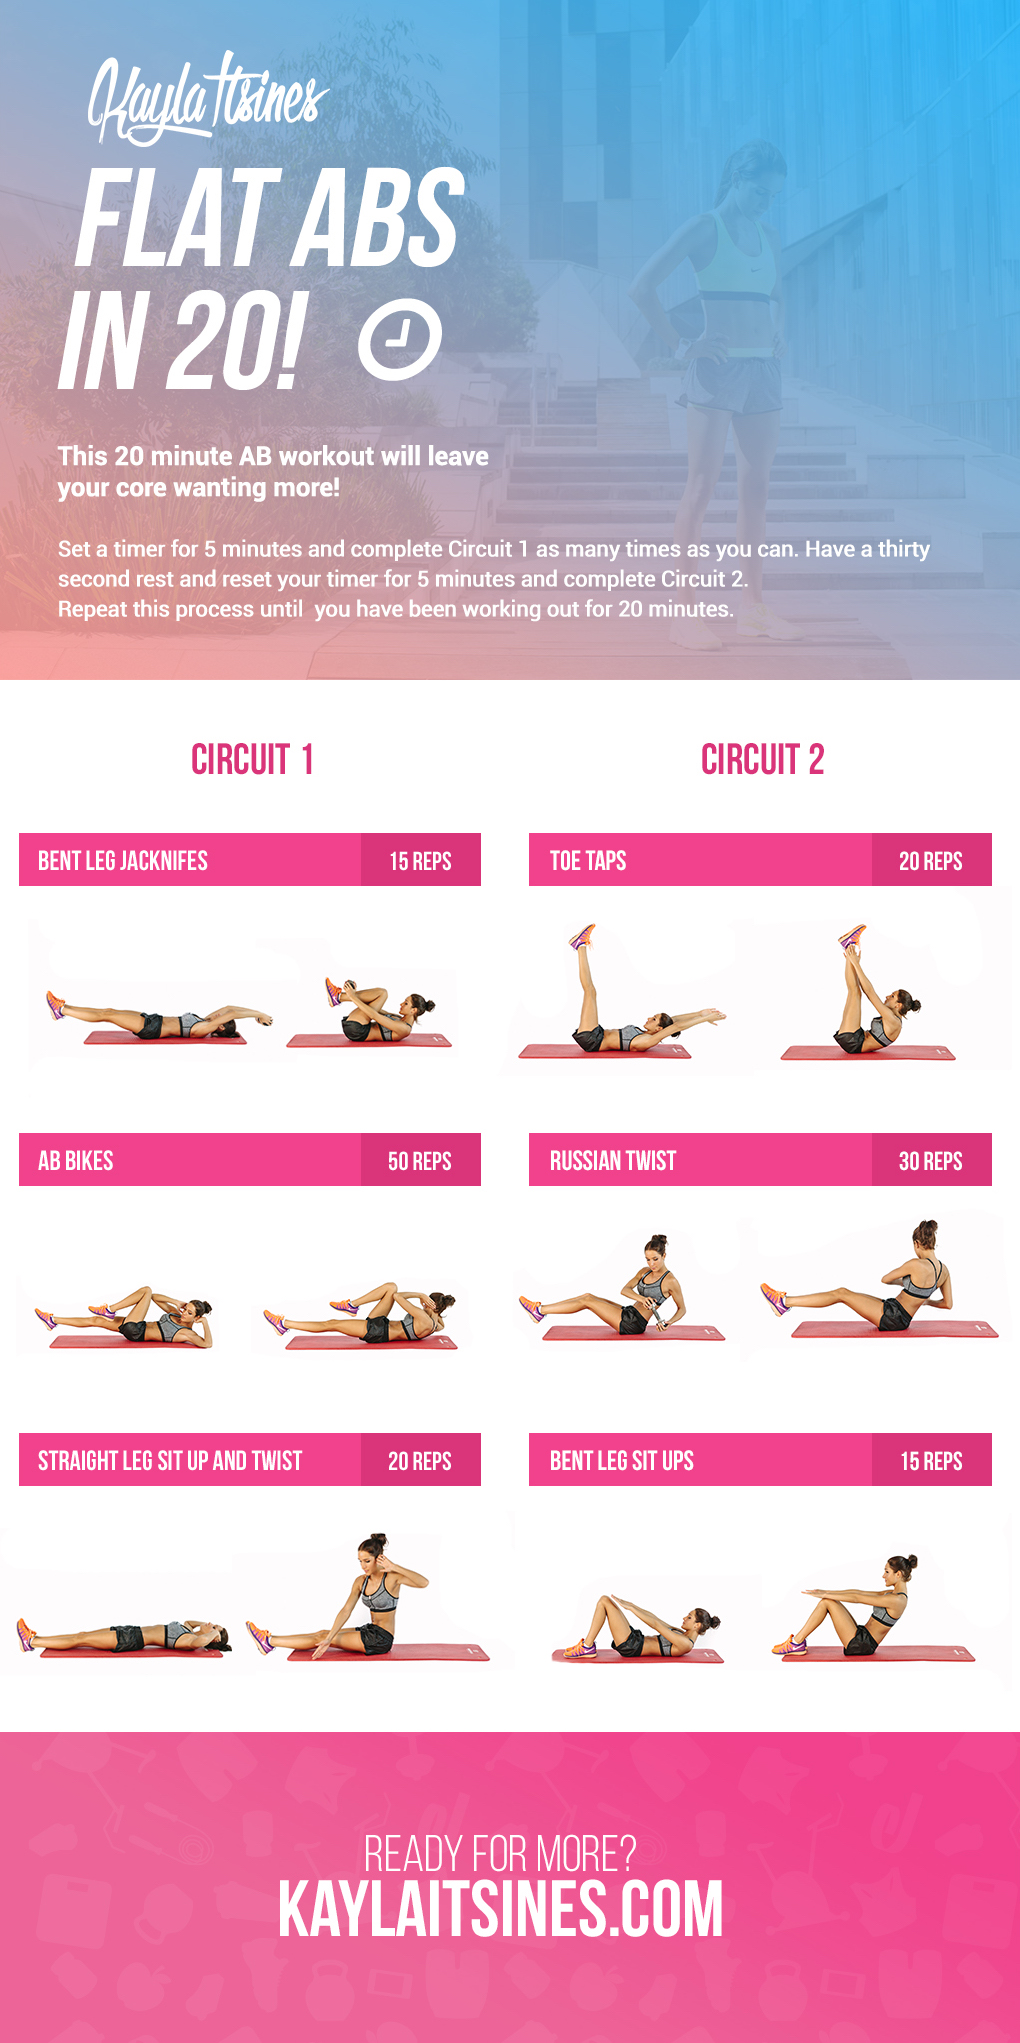 9 Exercise Routines That Help You Get Six-Pack Abs